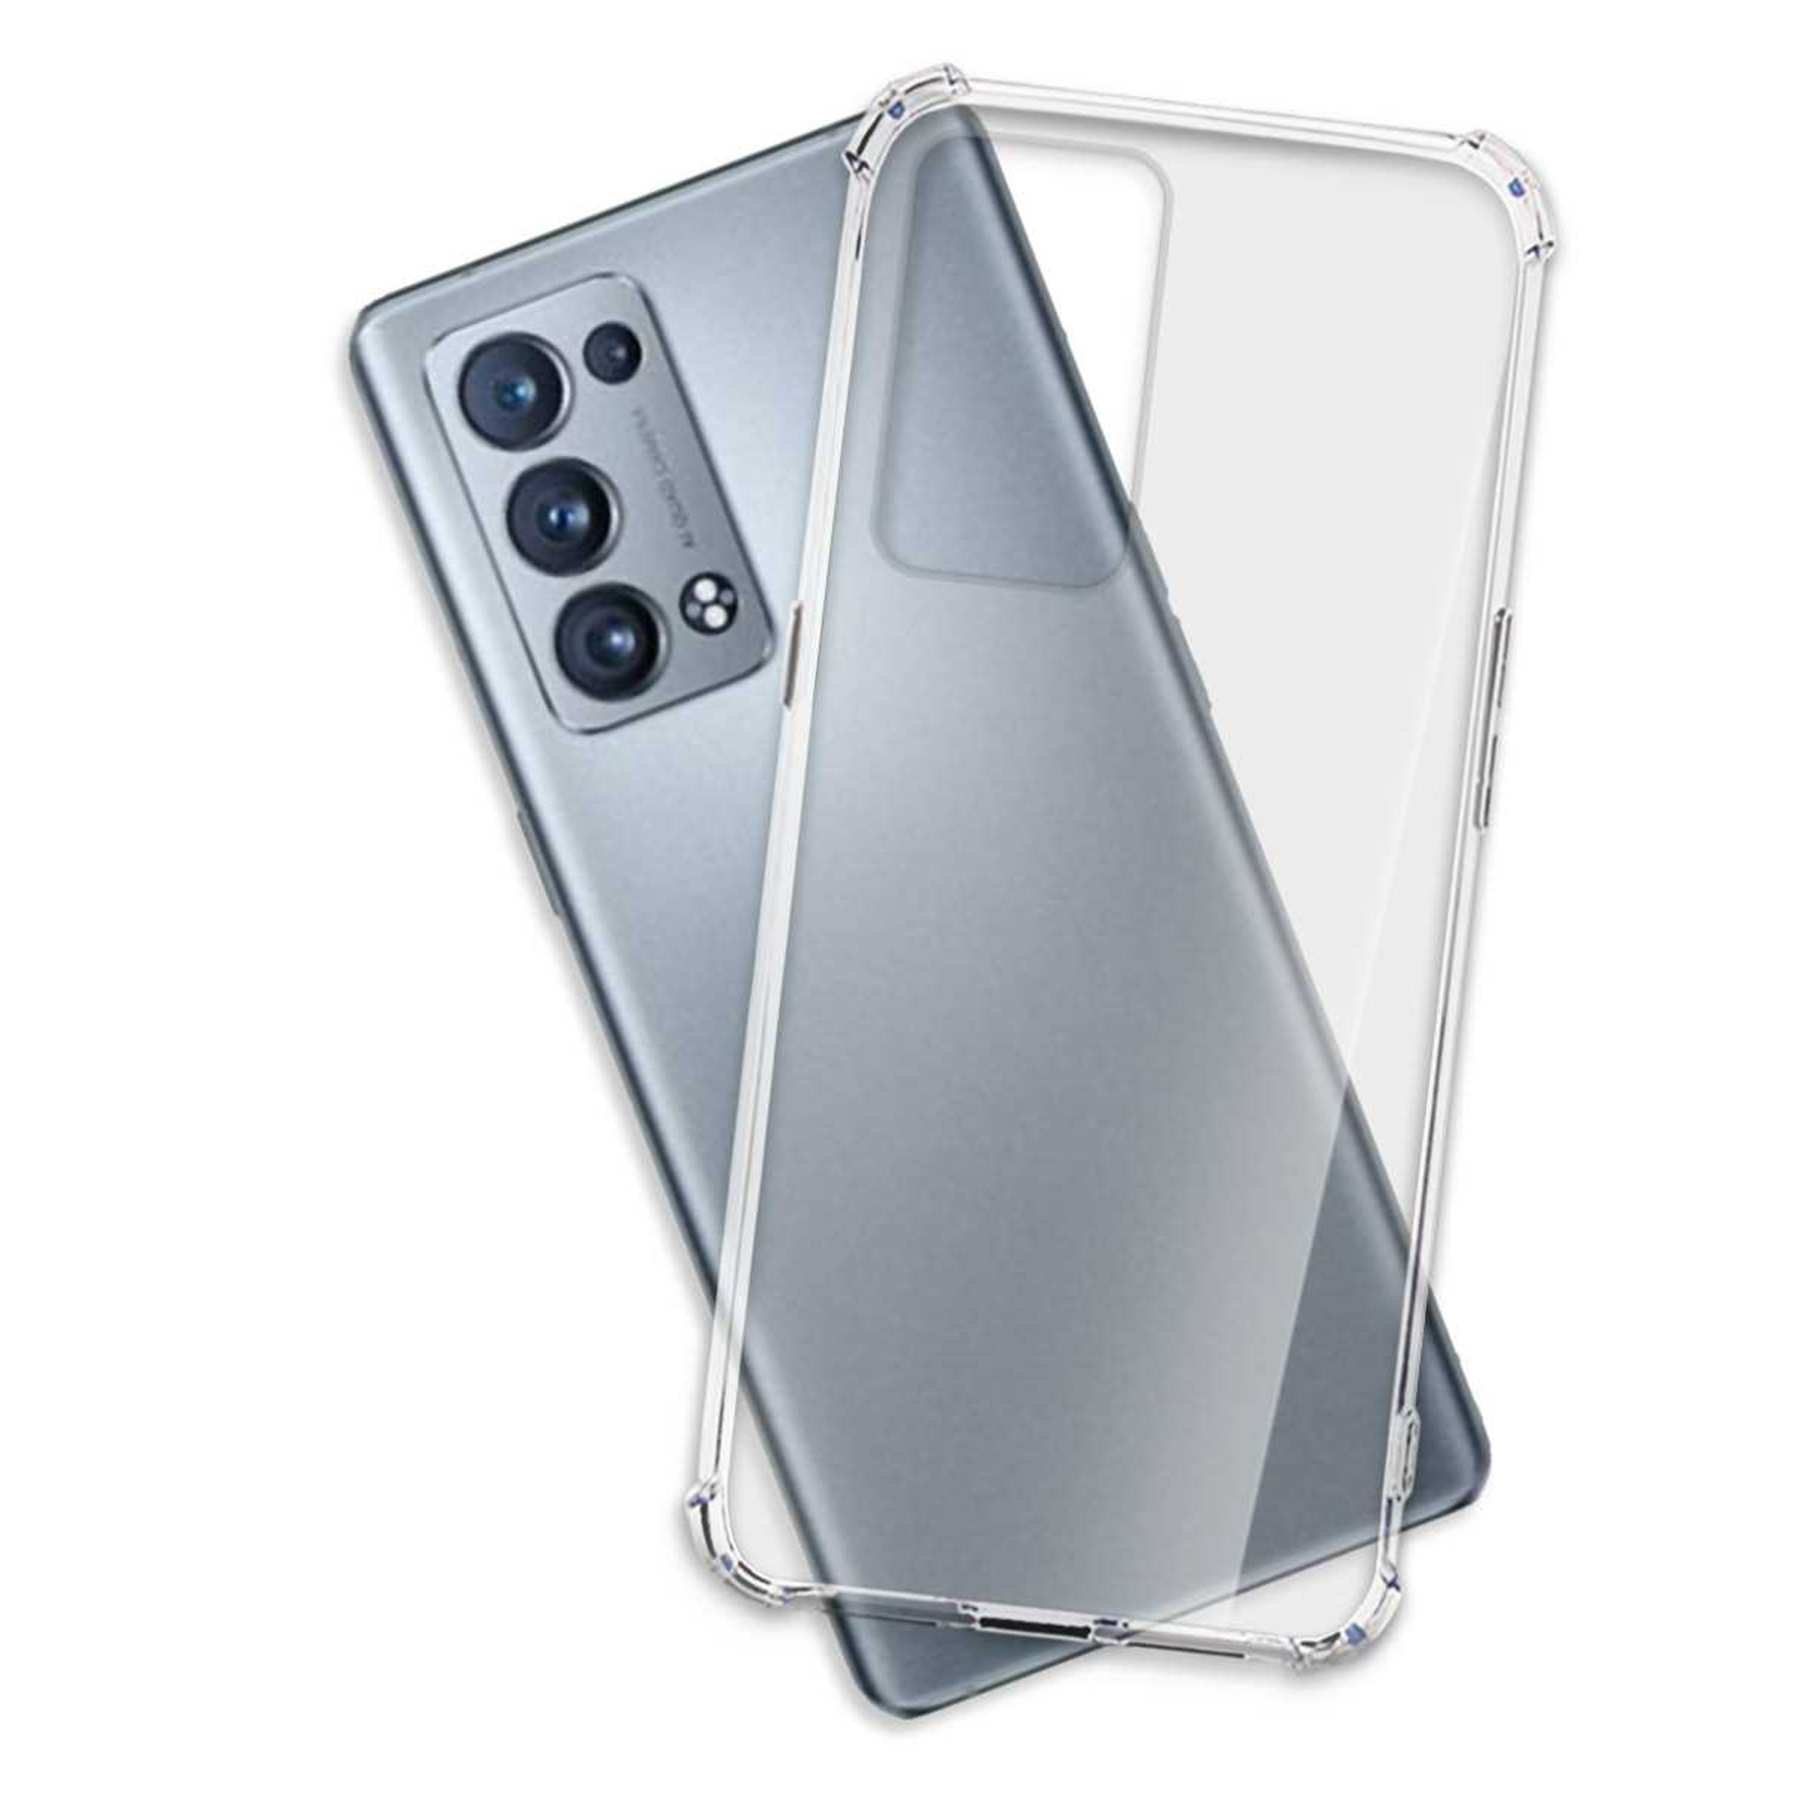 MTB MORE Armor Oppo, Clear Transparent 4G, Backcover, Reno ENERGY 6 Case